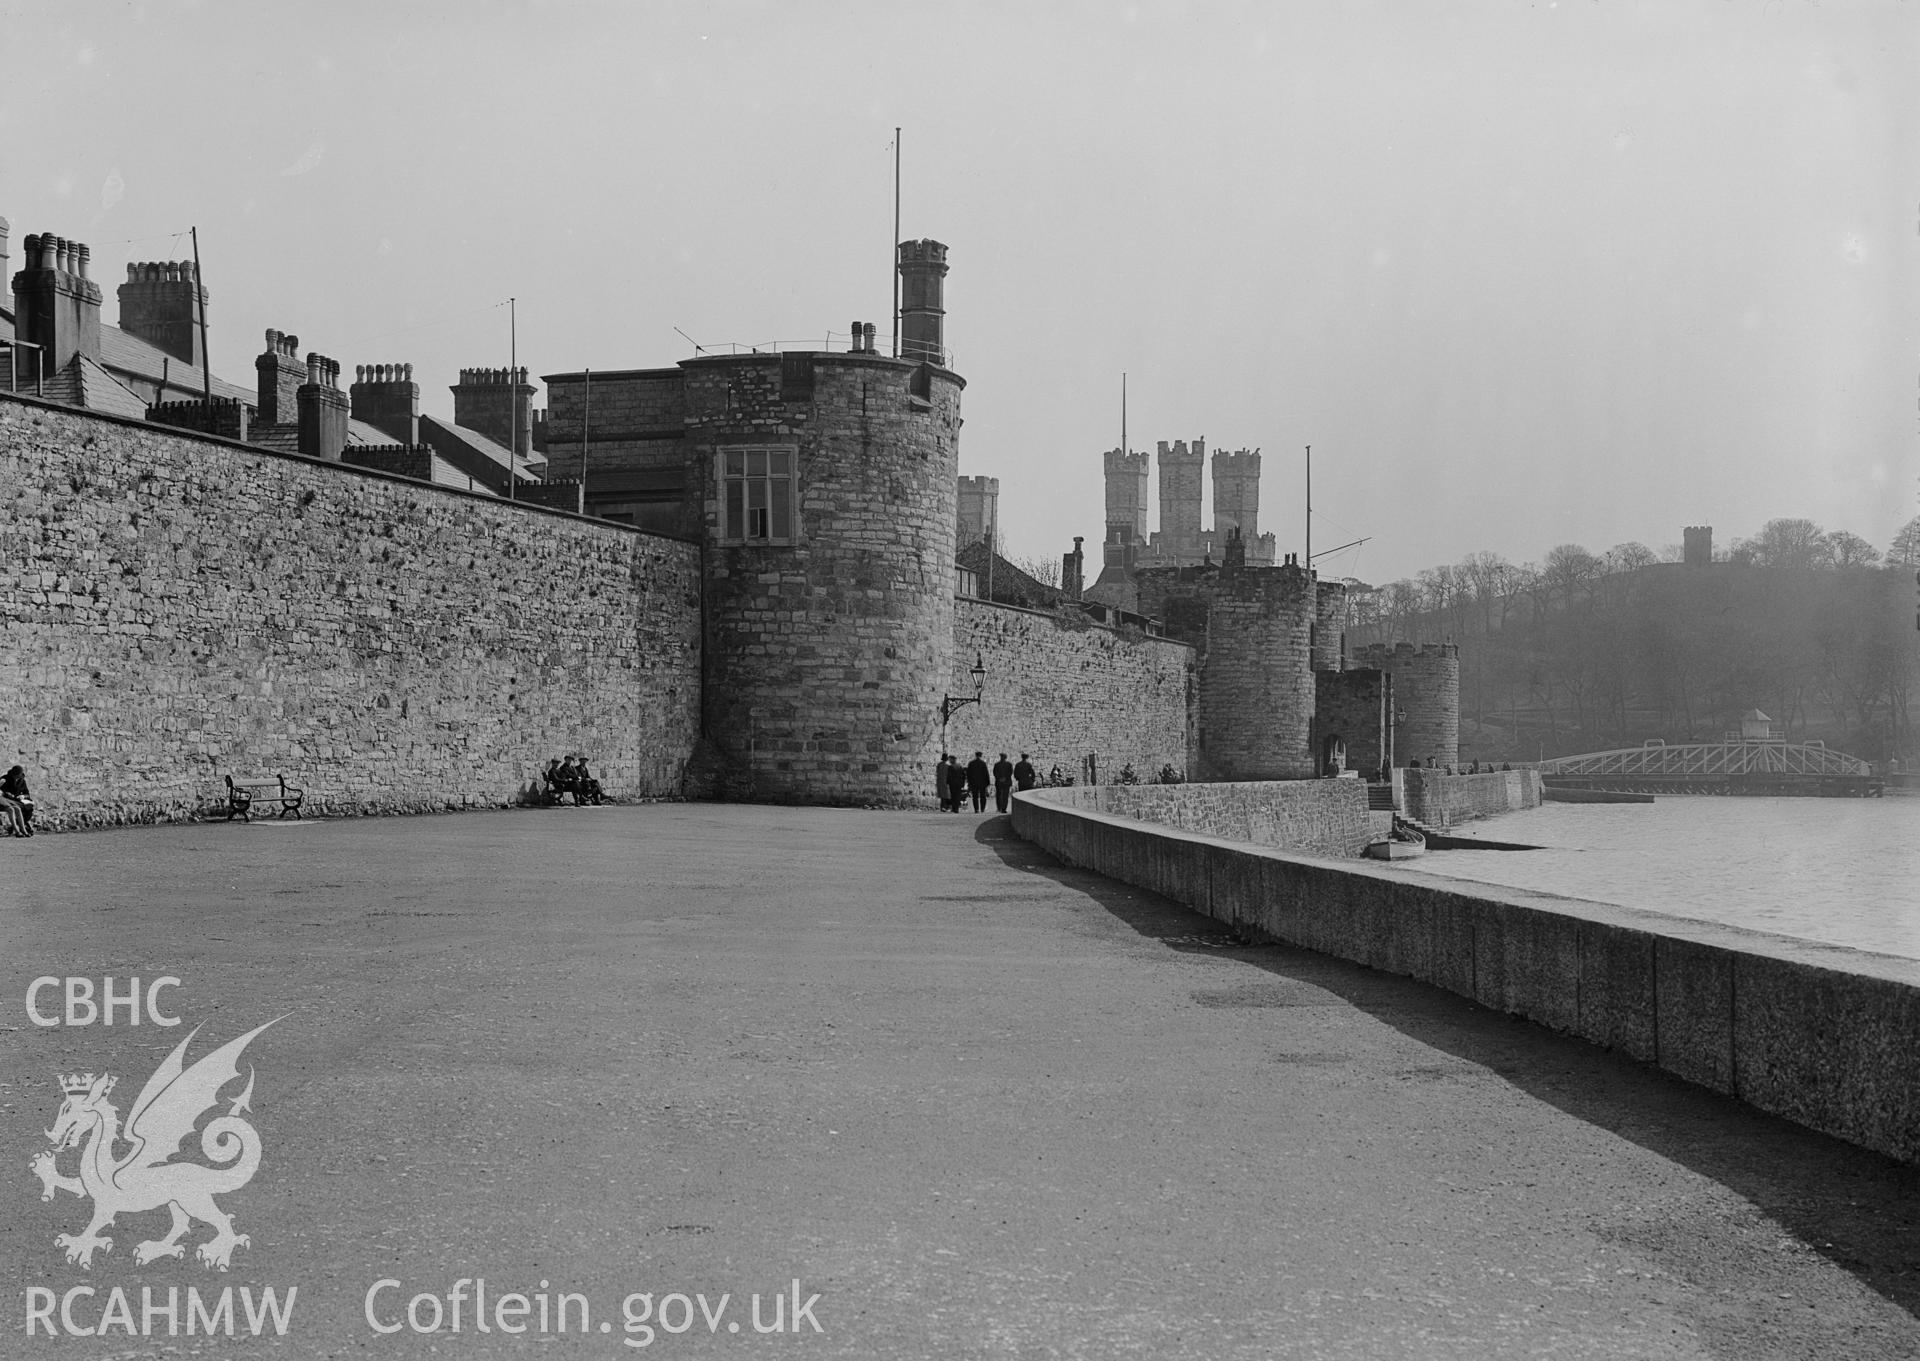 View of Caernarfon Town Walls from the west.